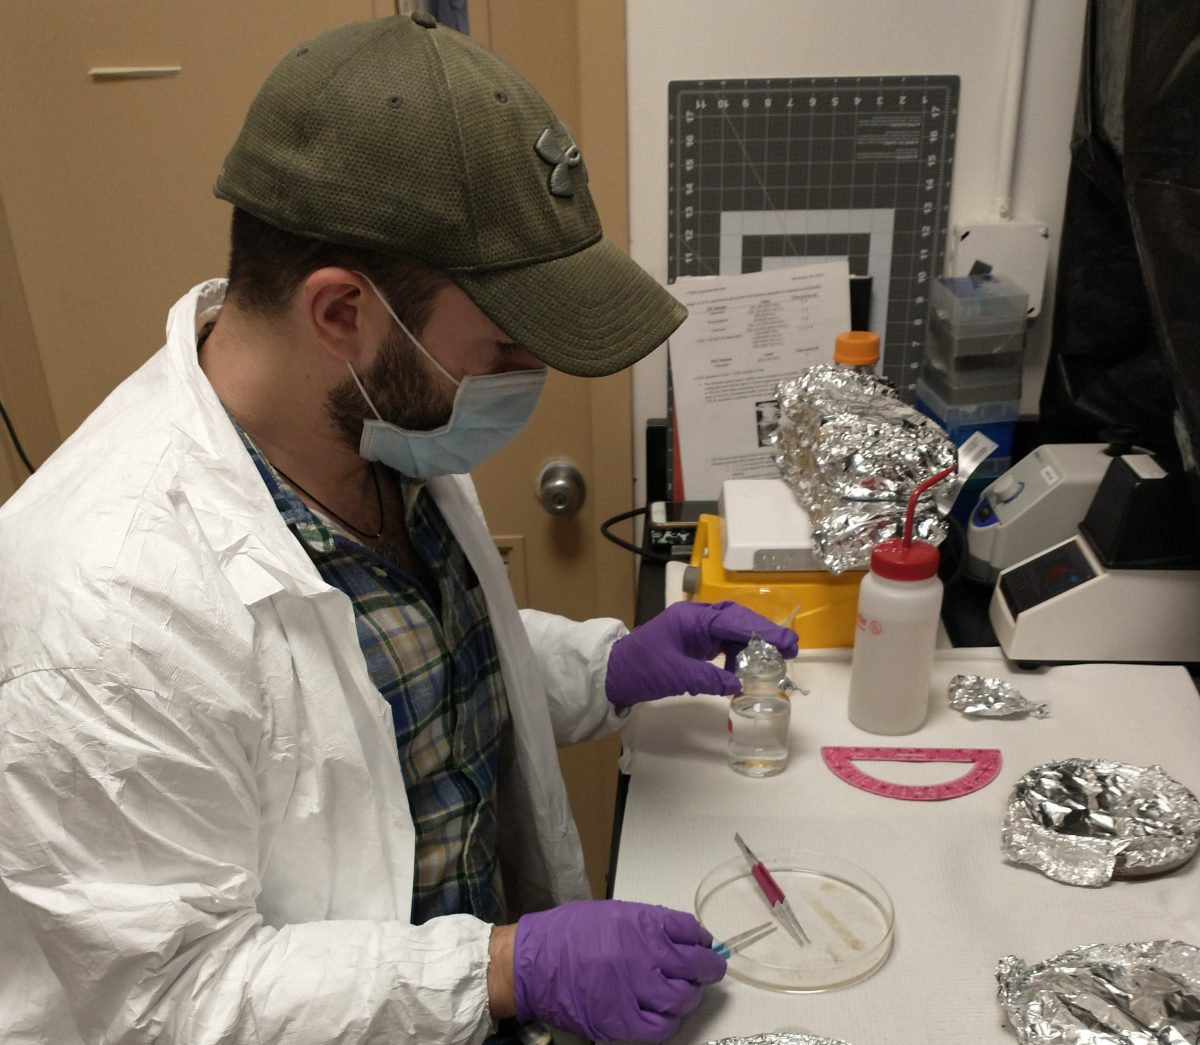 WHOI postdoctoral investigator Michael Mazzotta cuts plastic samples to measure respiration signals of microbial communities respiring cellulose diacetate. A new study led by WHOI researchers finds that cellulose diacetate, a bio-based plastic, degrades in the ocean faster than previously thought.